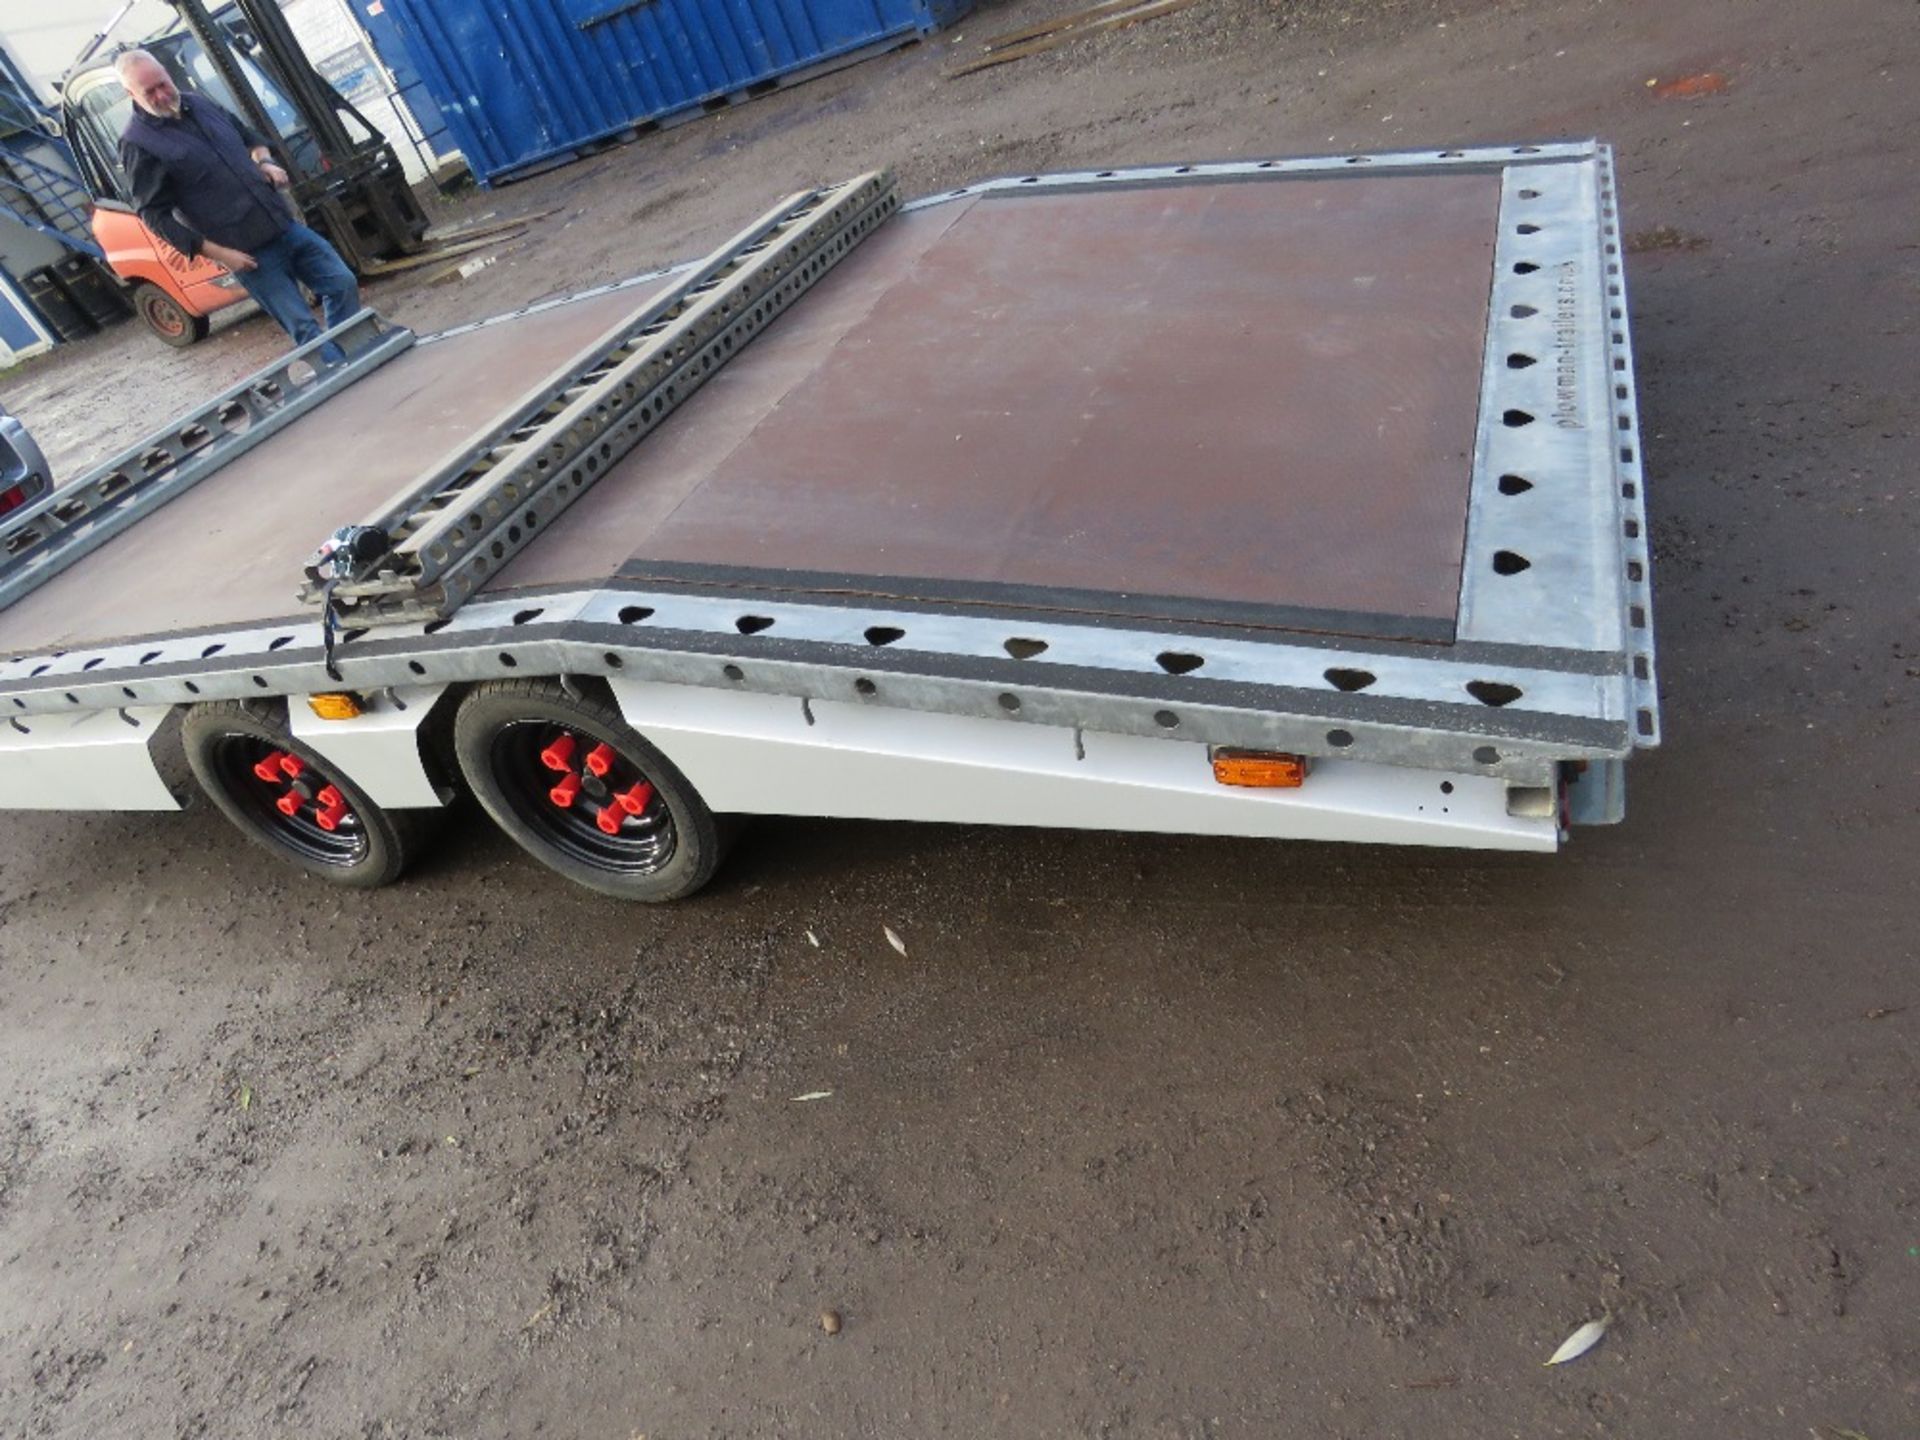 PLOWMAN PCT41 TWIN AXLED BEAVERTAIL TRAILER. 13FT X 7FT BED APPROX WITH RAMPS AS SHOWN. 3OOOKG RATED - Image 6 of 8